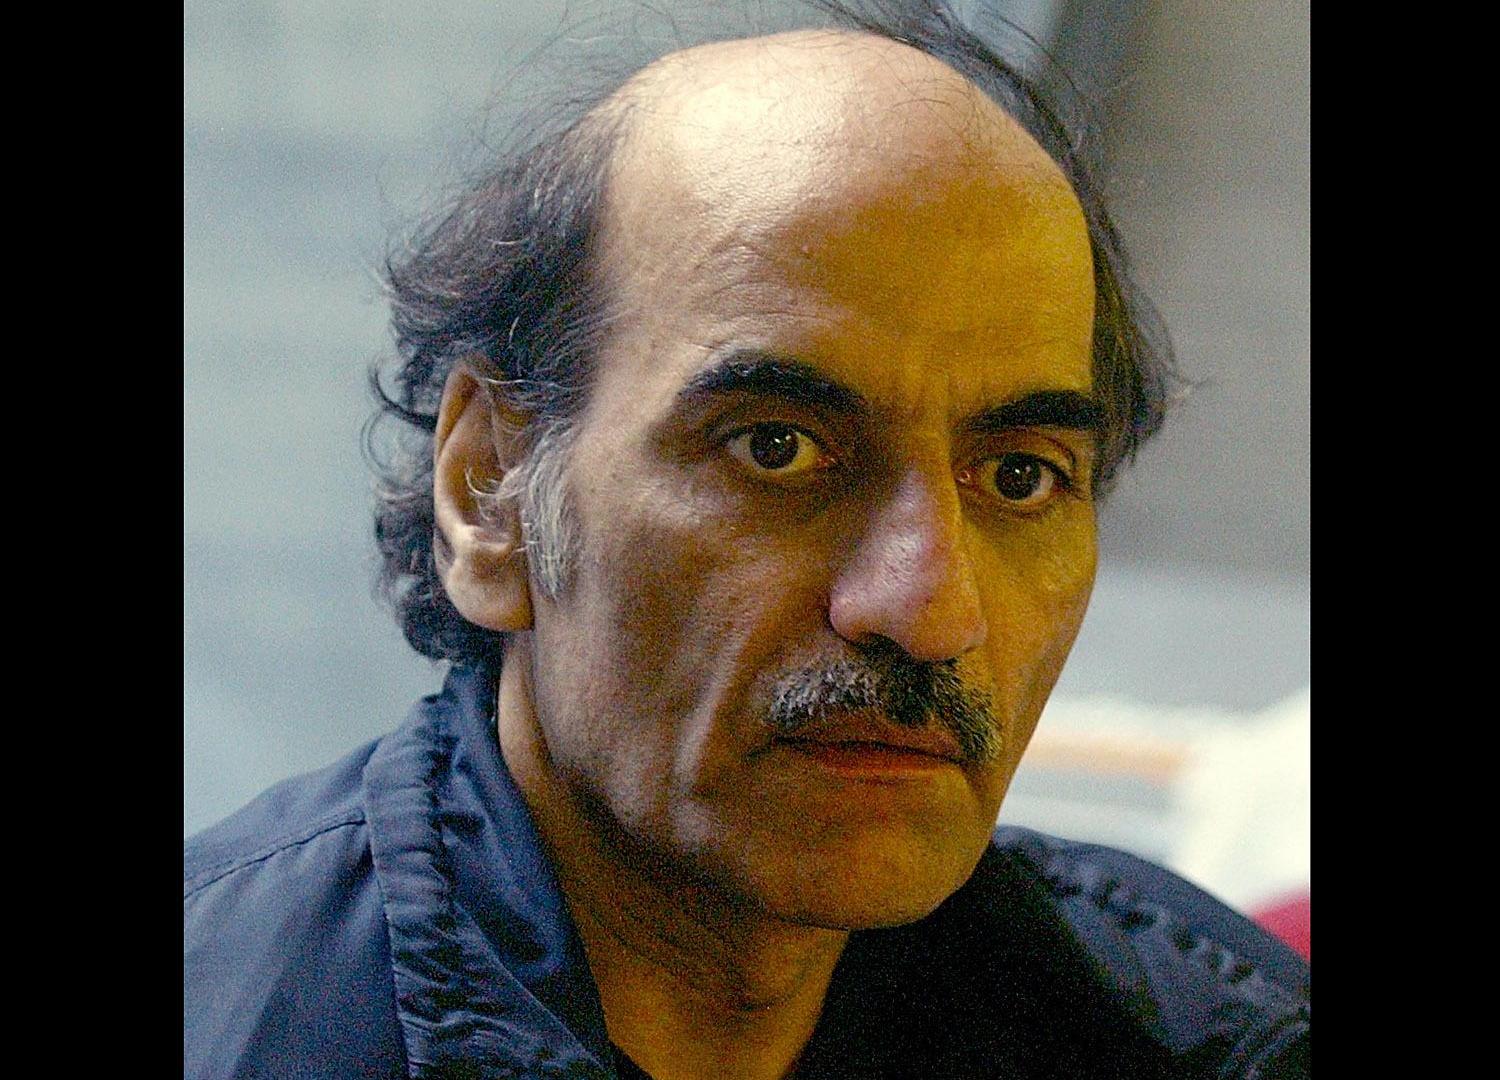 Iranian who inspired The Terminal film dies at Paris airport